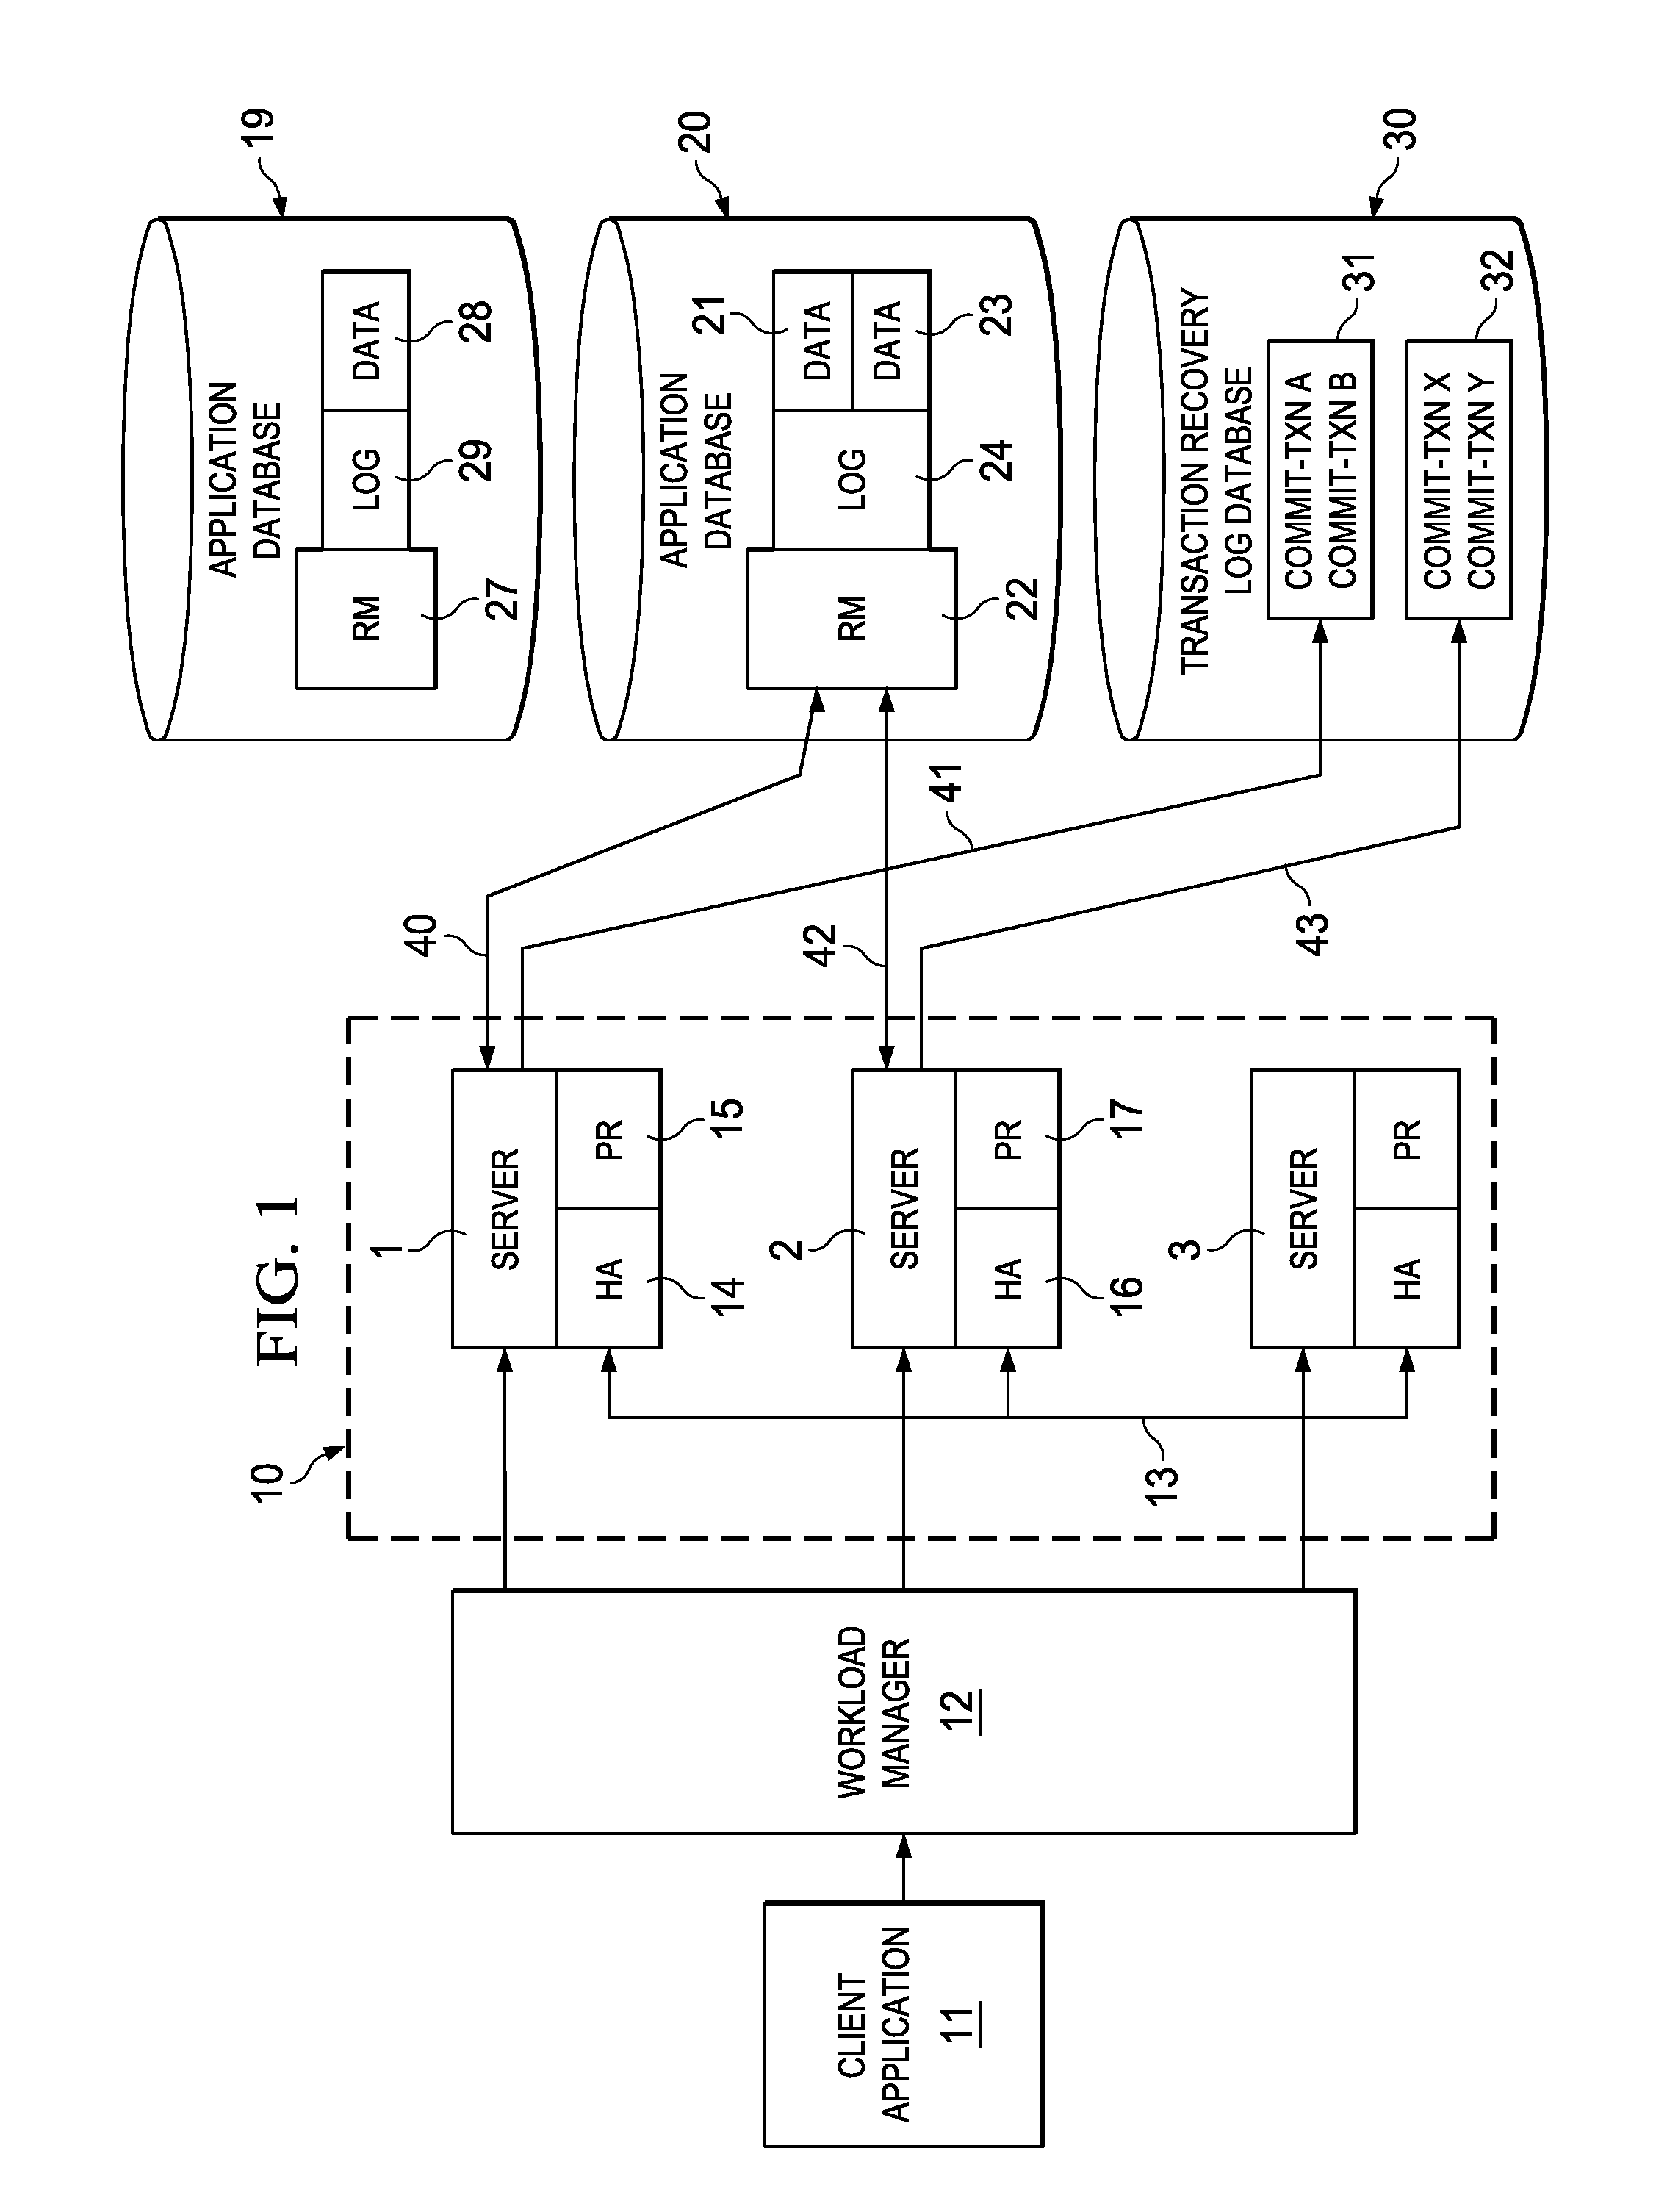 Transaction recovery in a transaction processing computer system employing multiple transaction managers